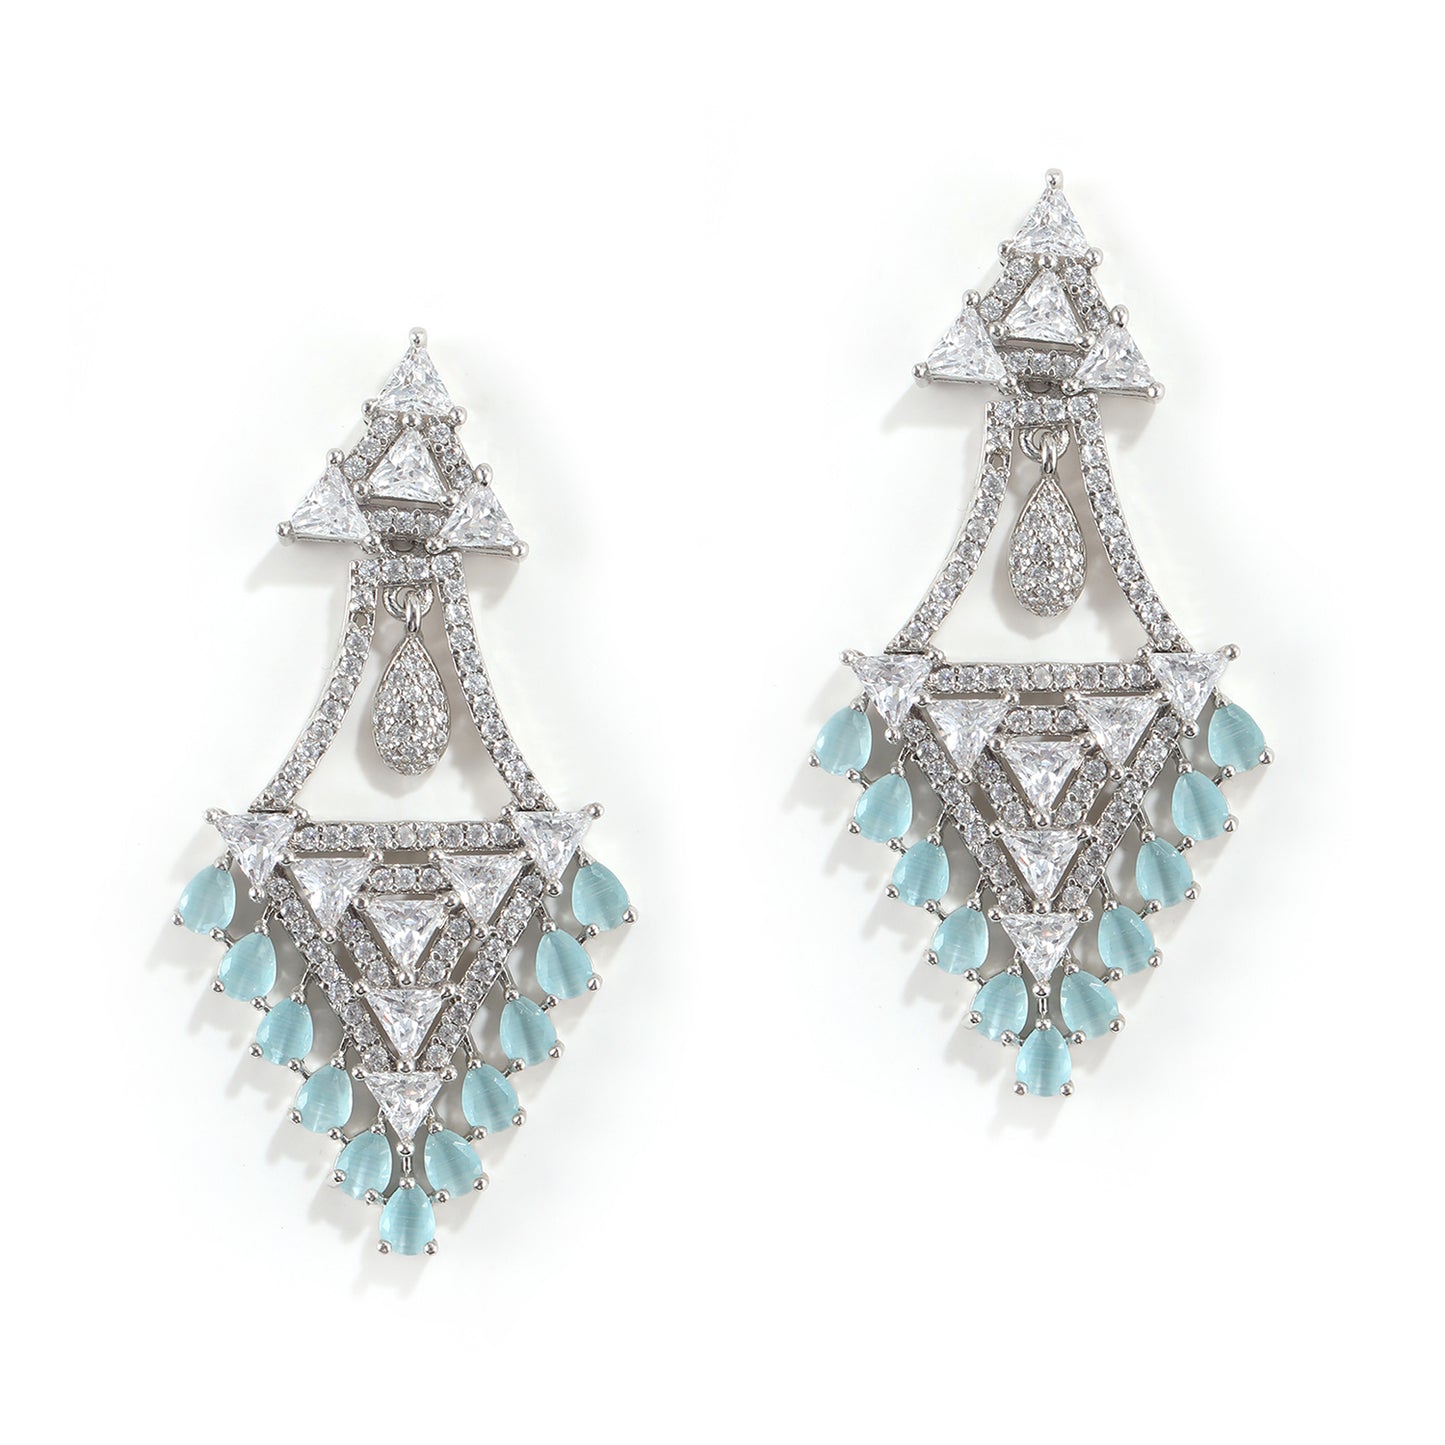 Silver and Jade Chandelier Earrings with Cubic Zirconia